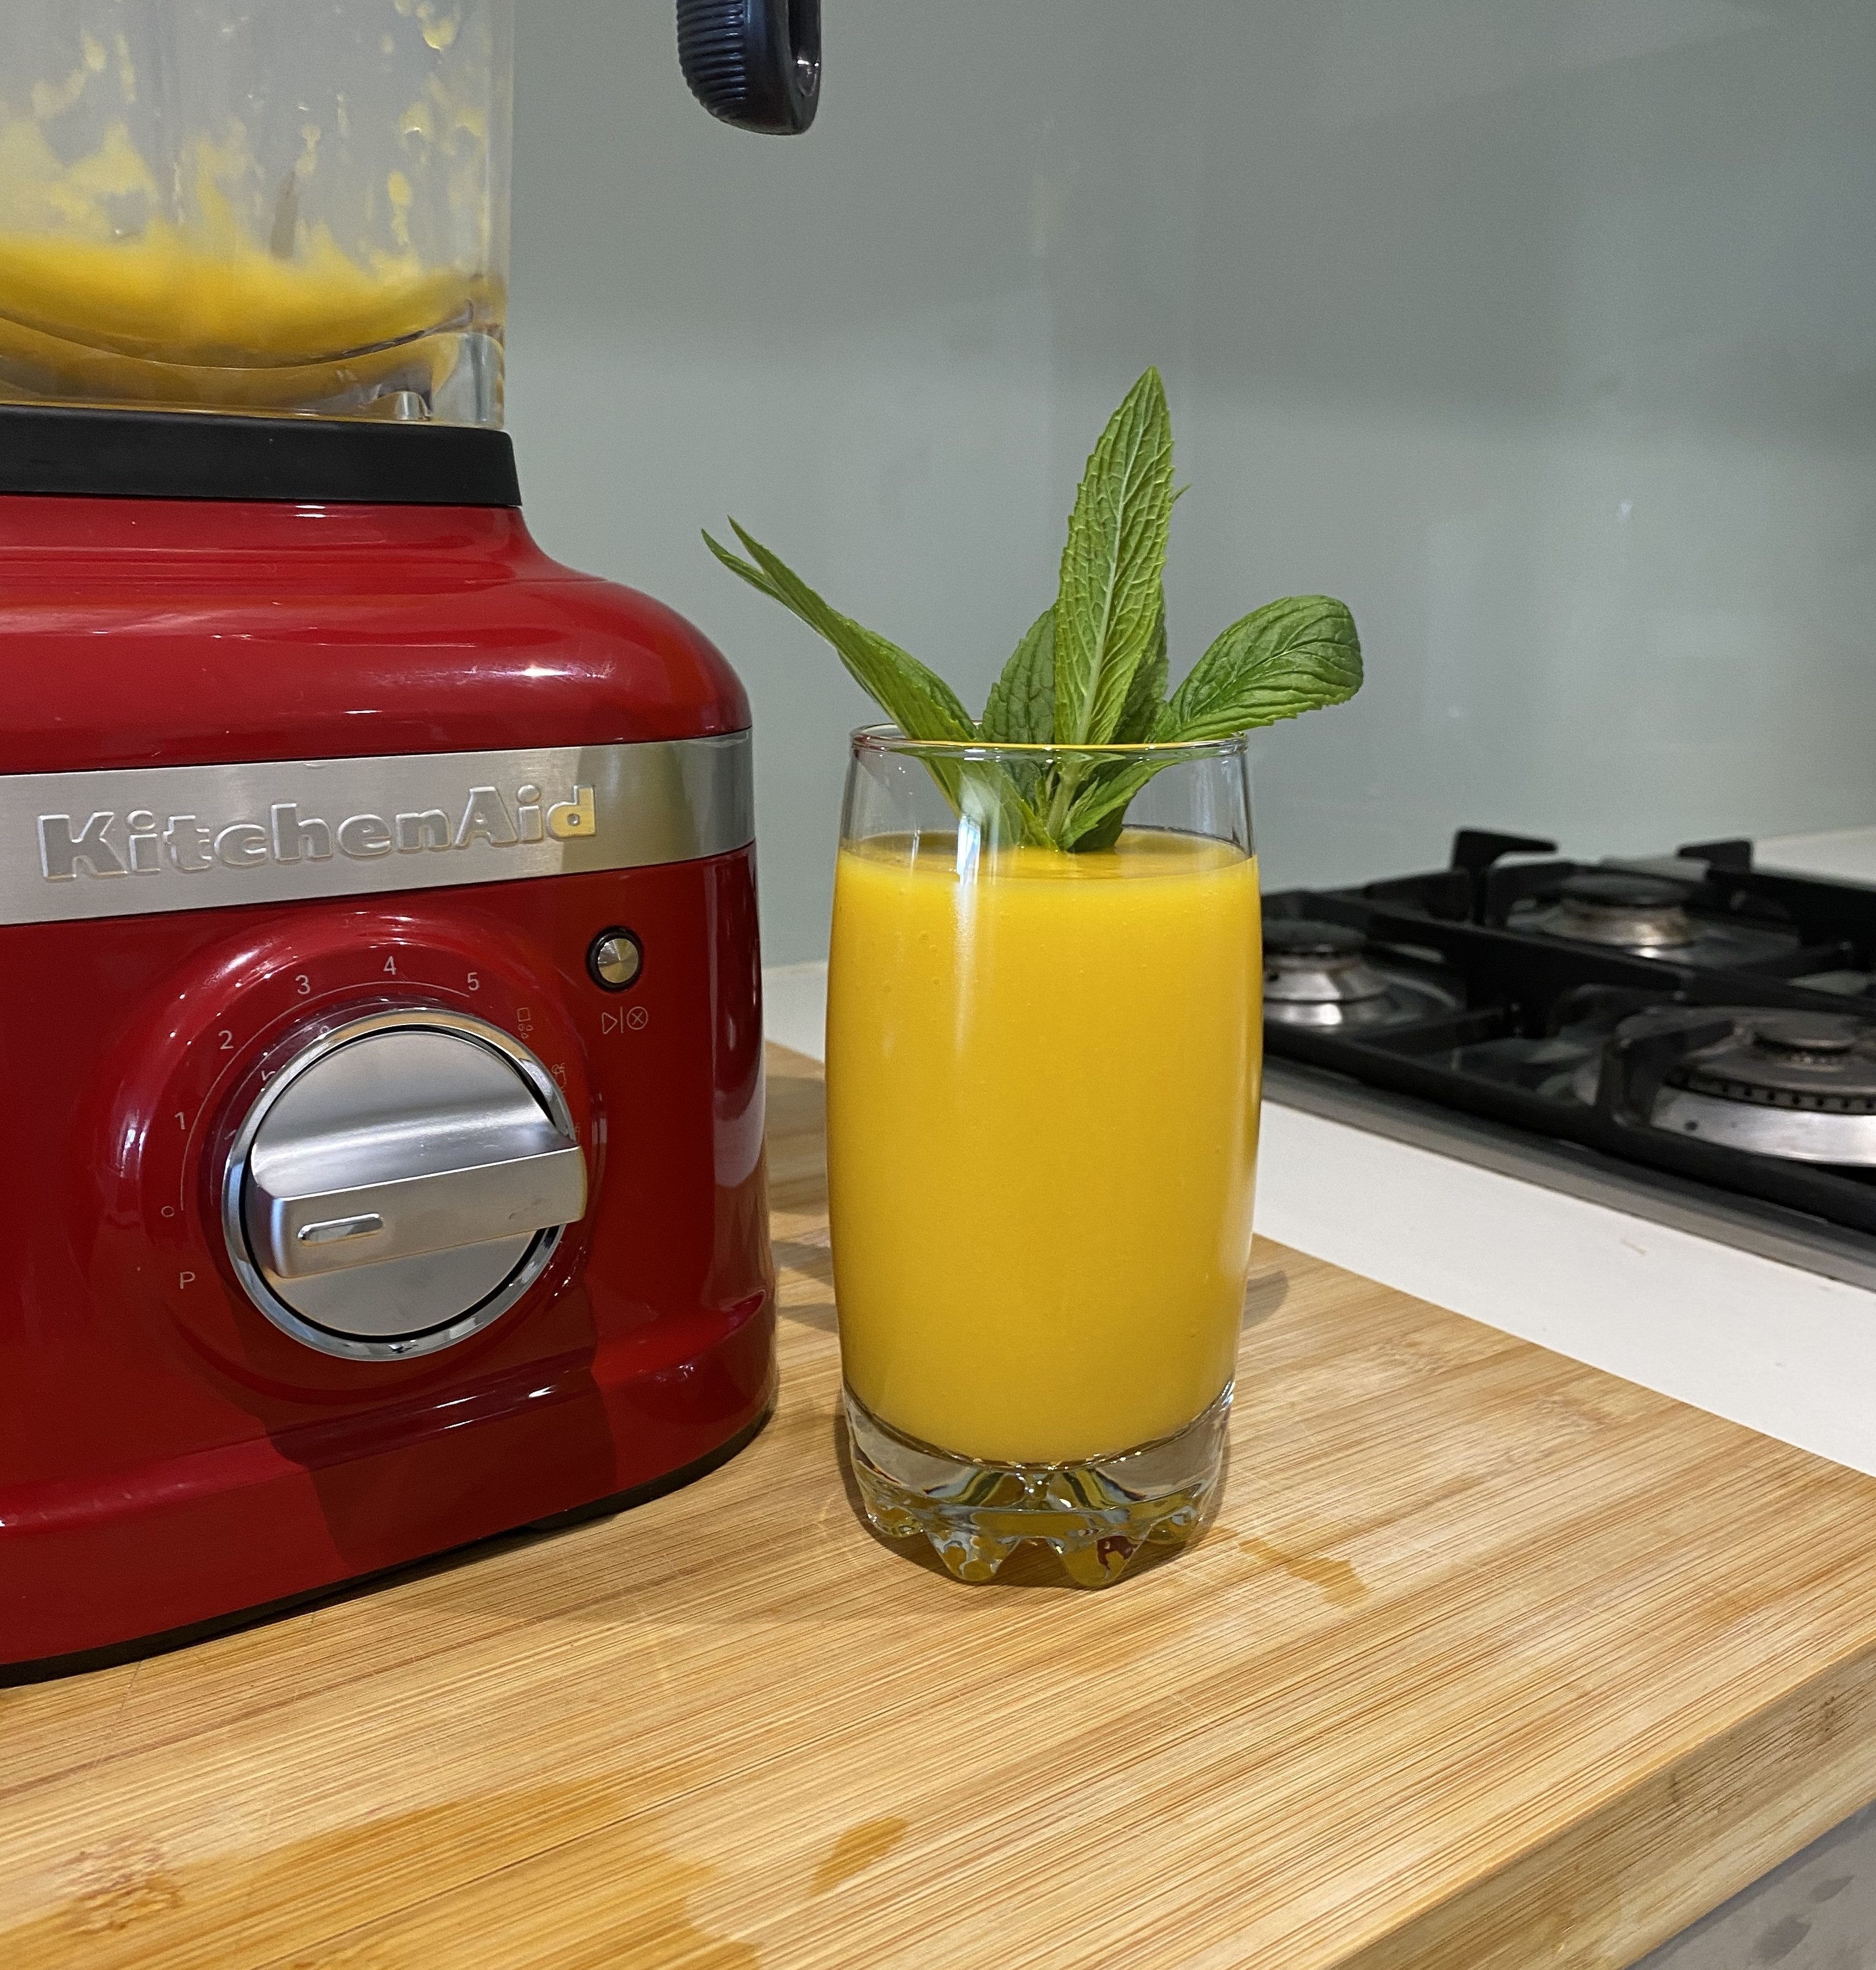 Picture of a delicious mango drink with a mint garnish next to the KitchenAid K400 Blender